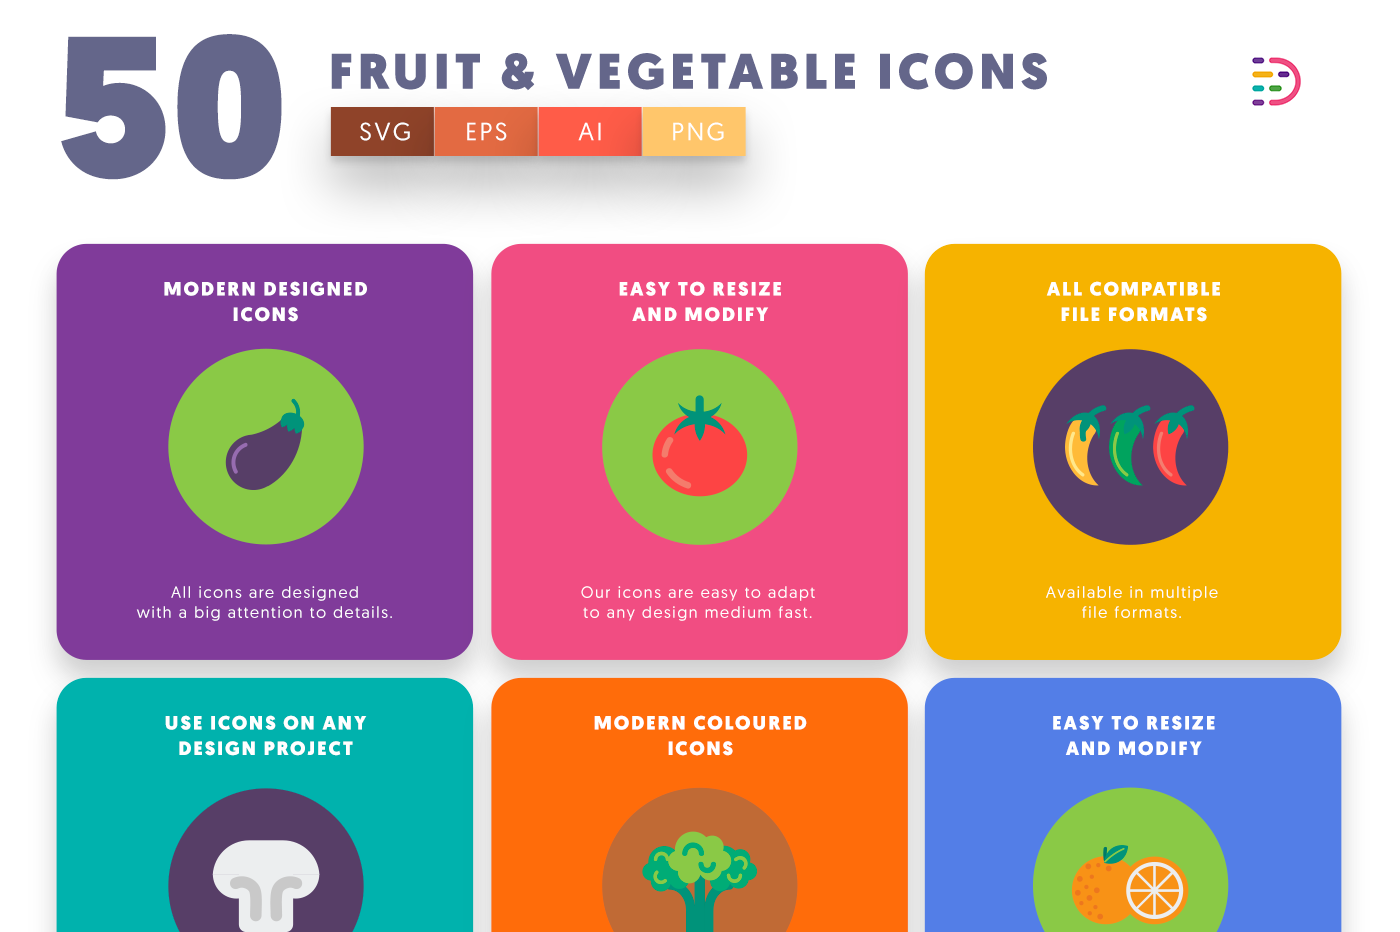  Fruits and Vegetable Icons with colored backgrounds